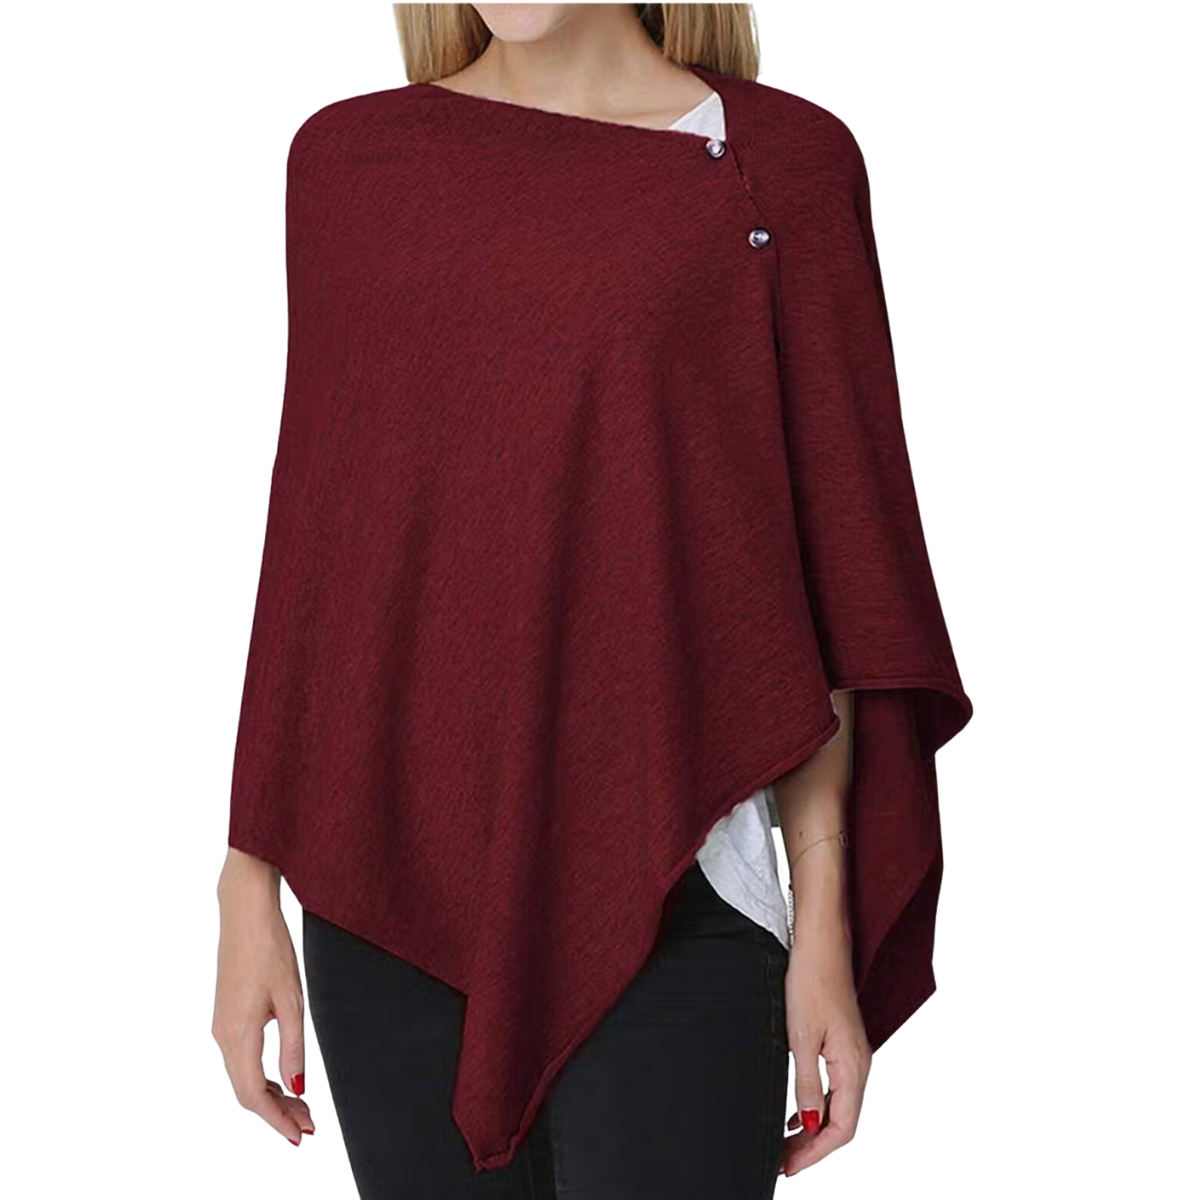 Burgundy Knit Poncho with buttons